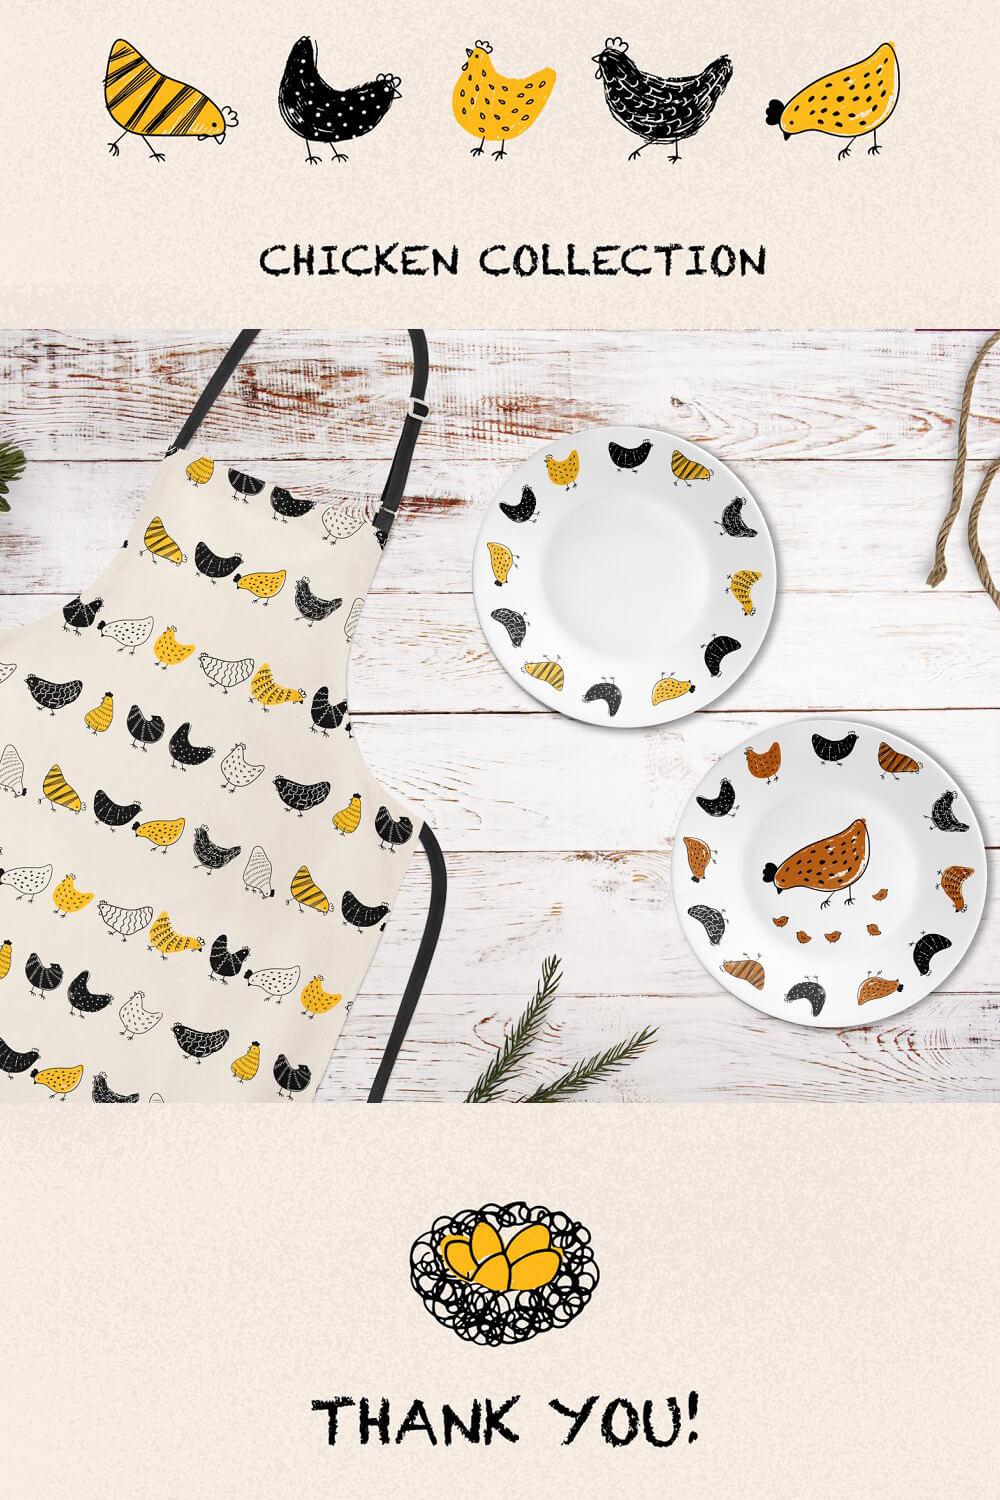 White apron and white plates depicting chickens.